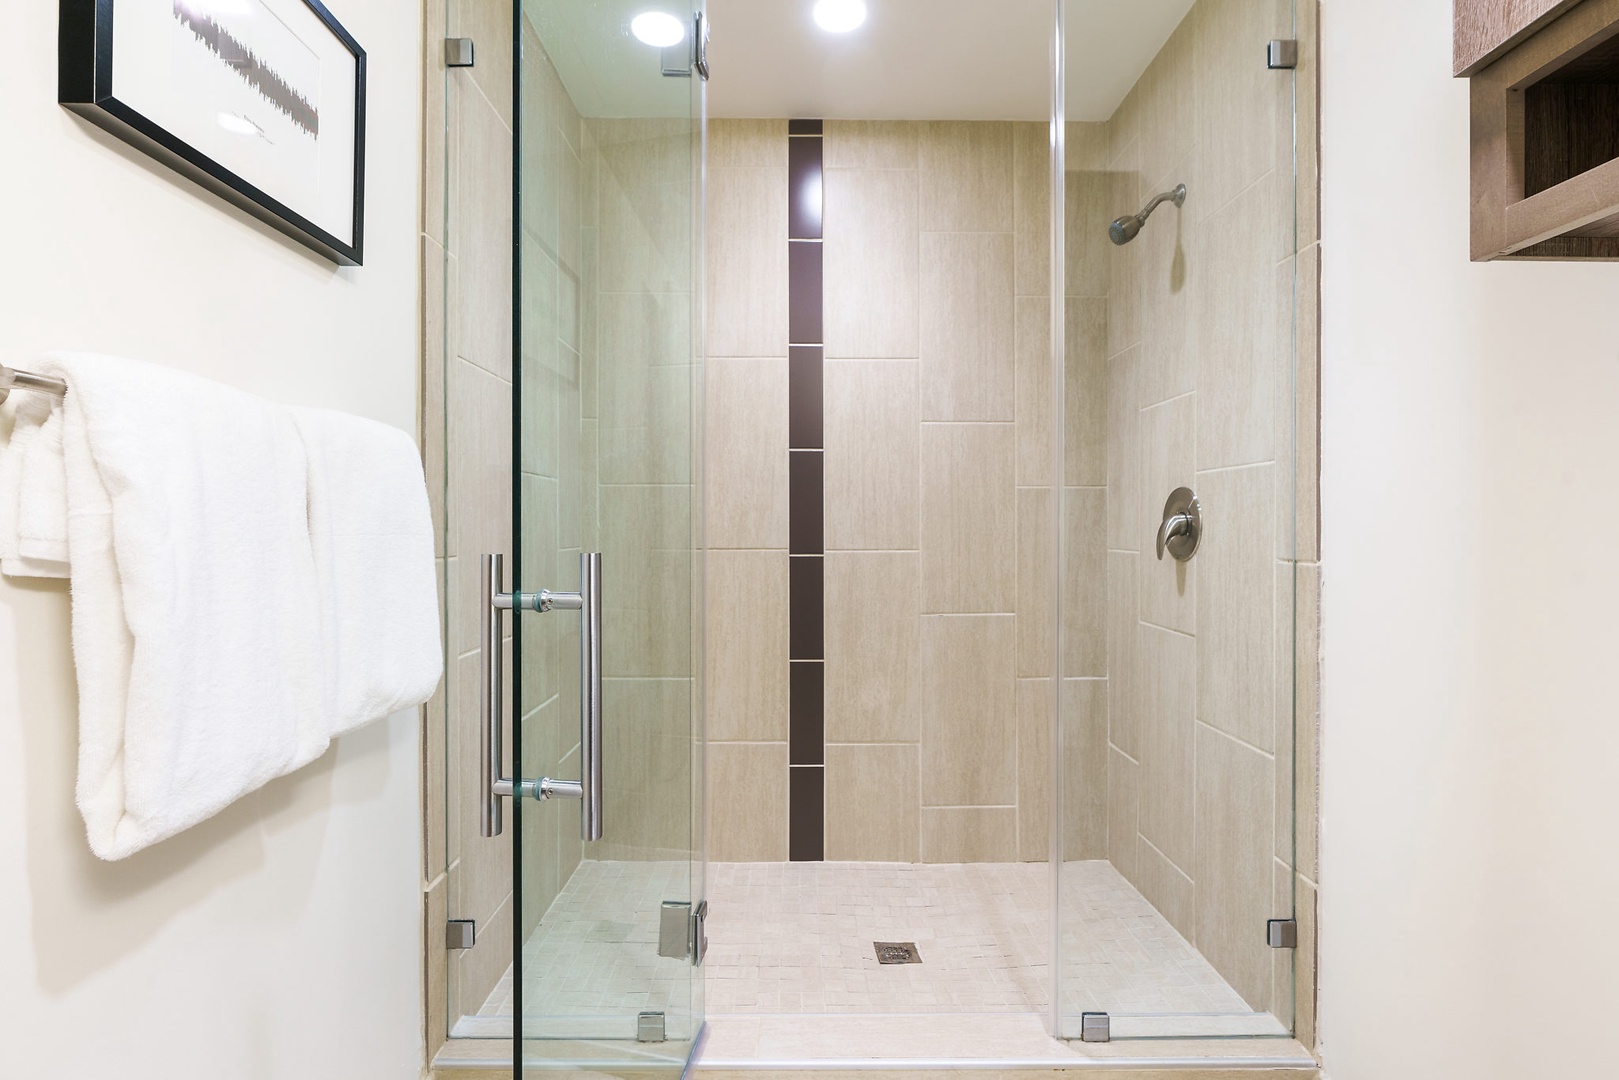 Refresh in the walk-in shower with modern fixtures.